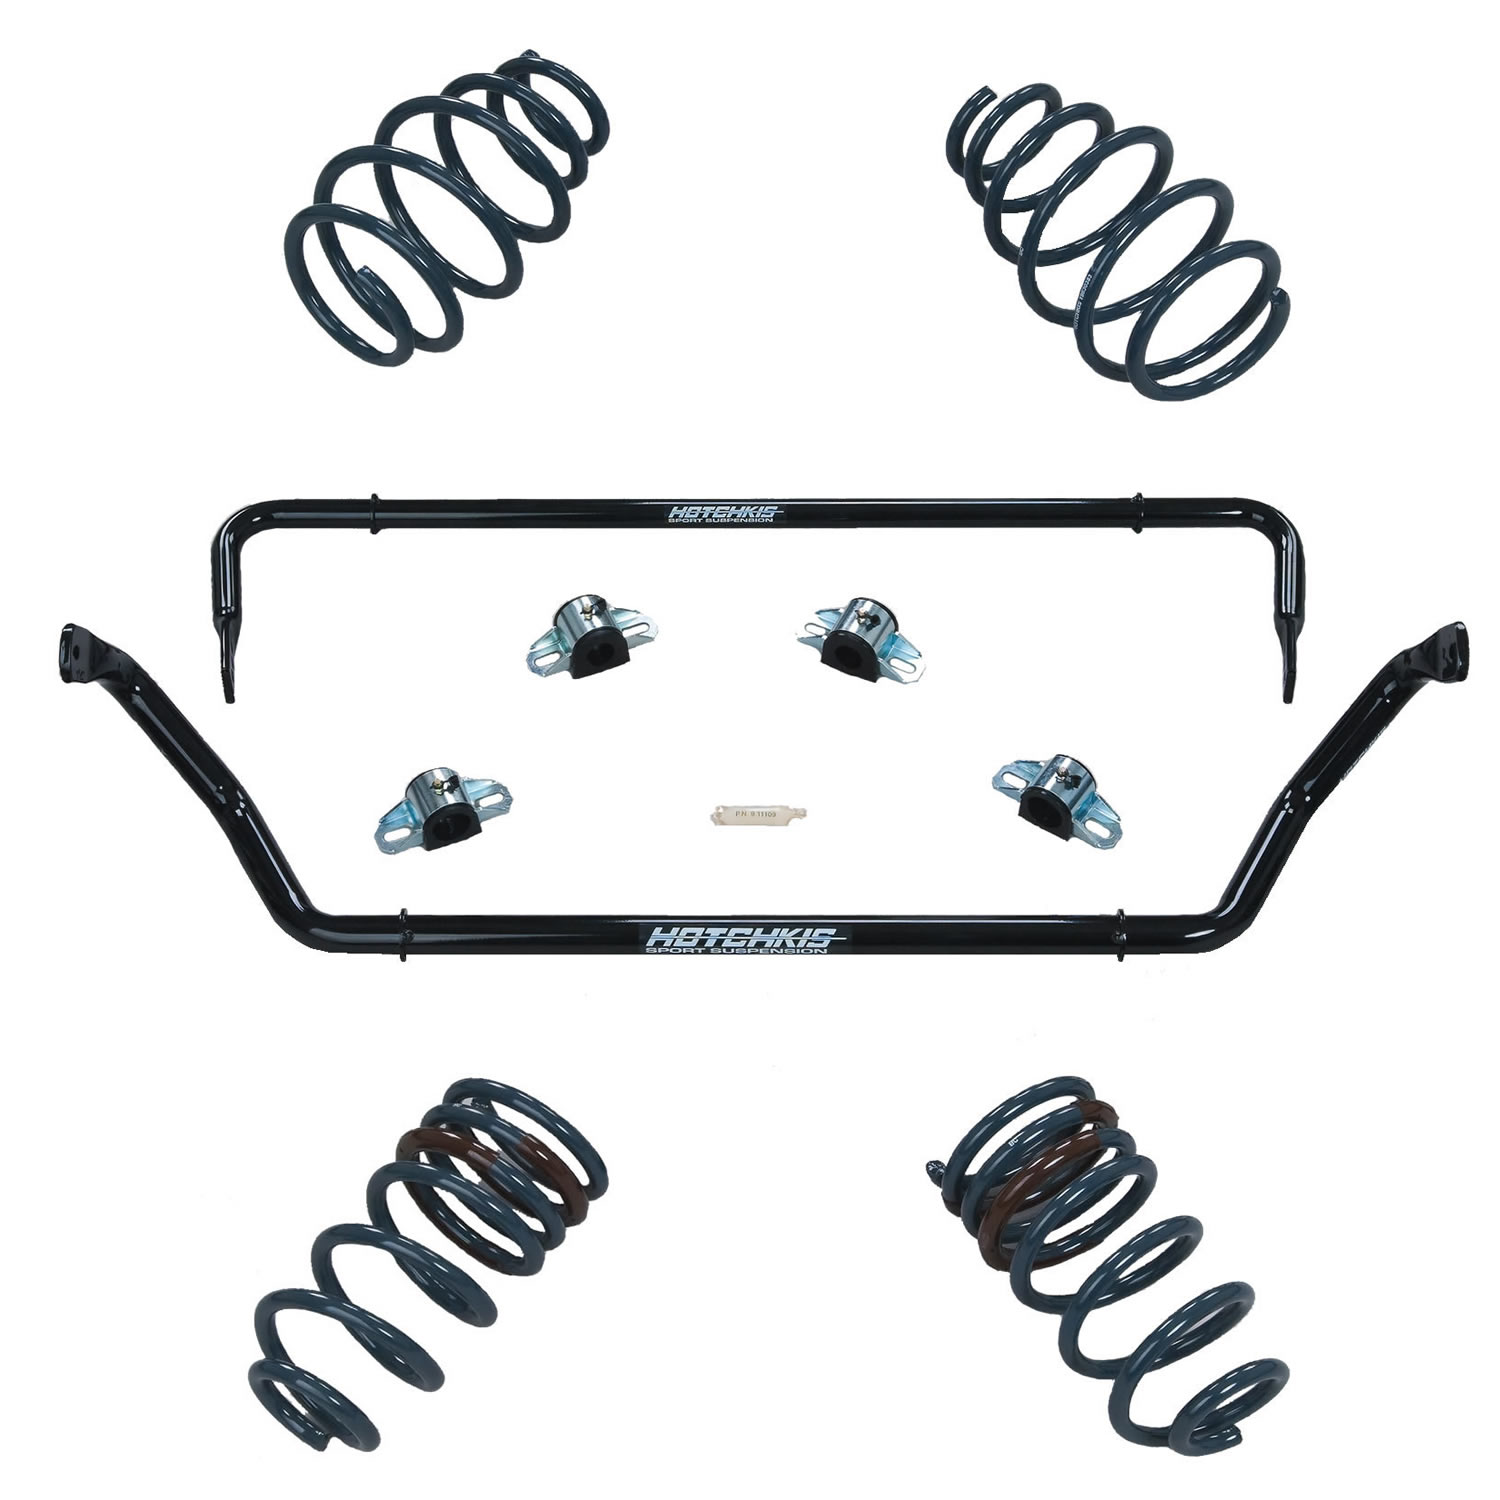 2010-2015 Camaro SS Suspension Stage 1 TVS, Springs are designed for use on V8 models only